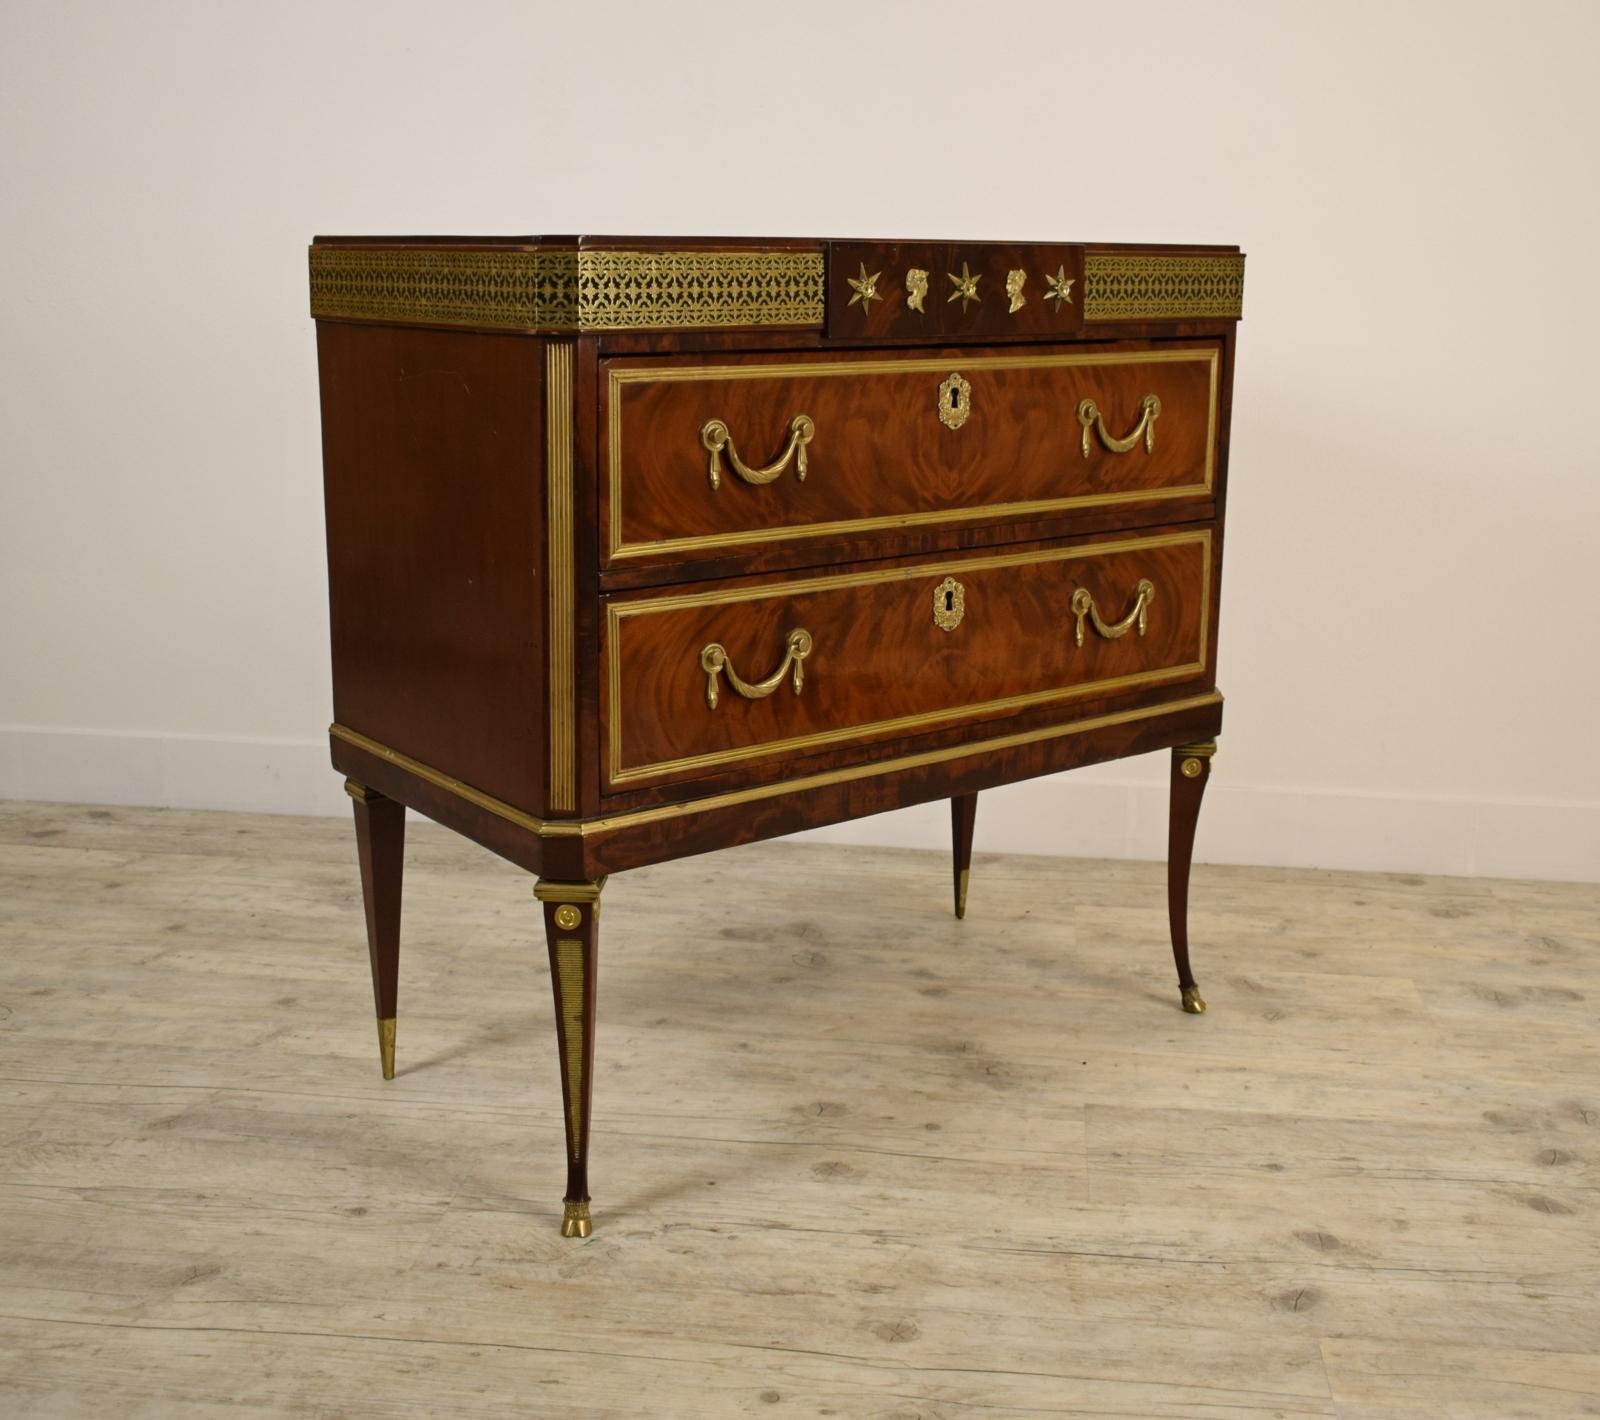 19th century, small Russian chest of drawers, veneered, with gilded bronzes

This high-quality, small chest of drawers was made of wood veneered , in the first half of the 19th century, in a typical Russian style between the Louis XVI and the Empire